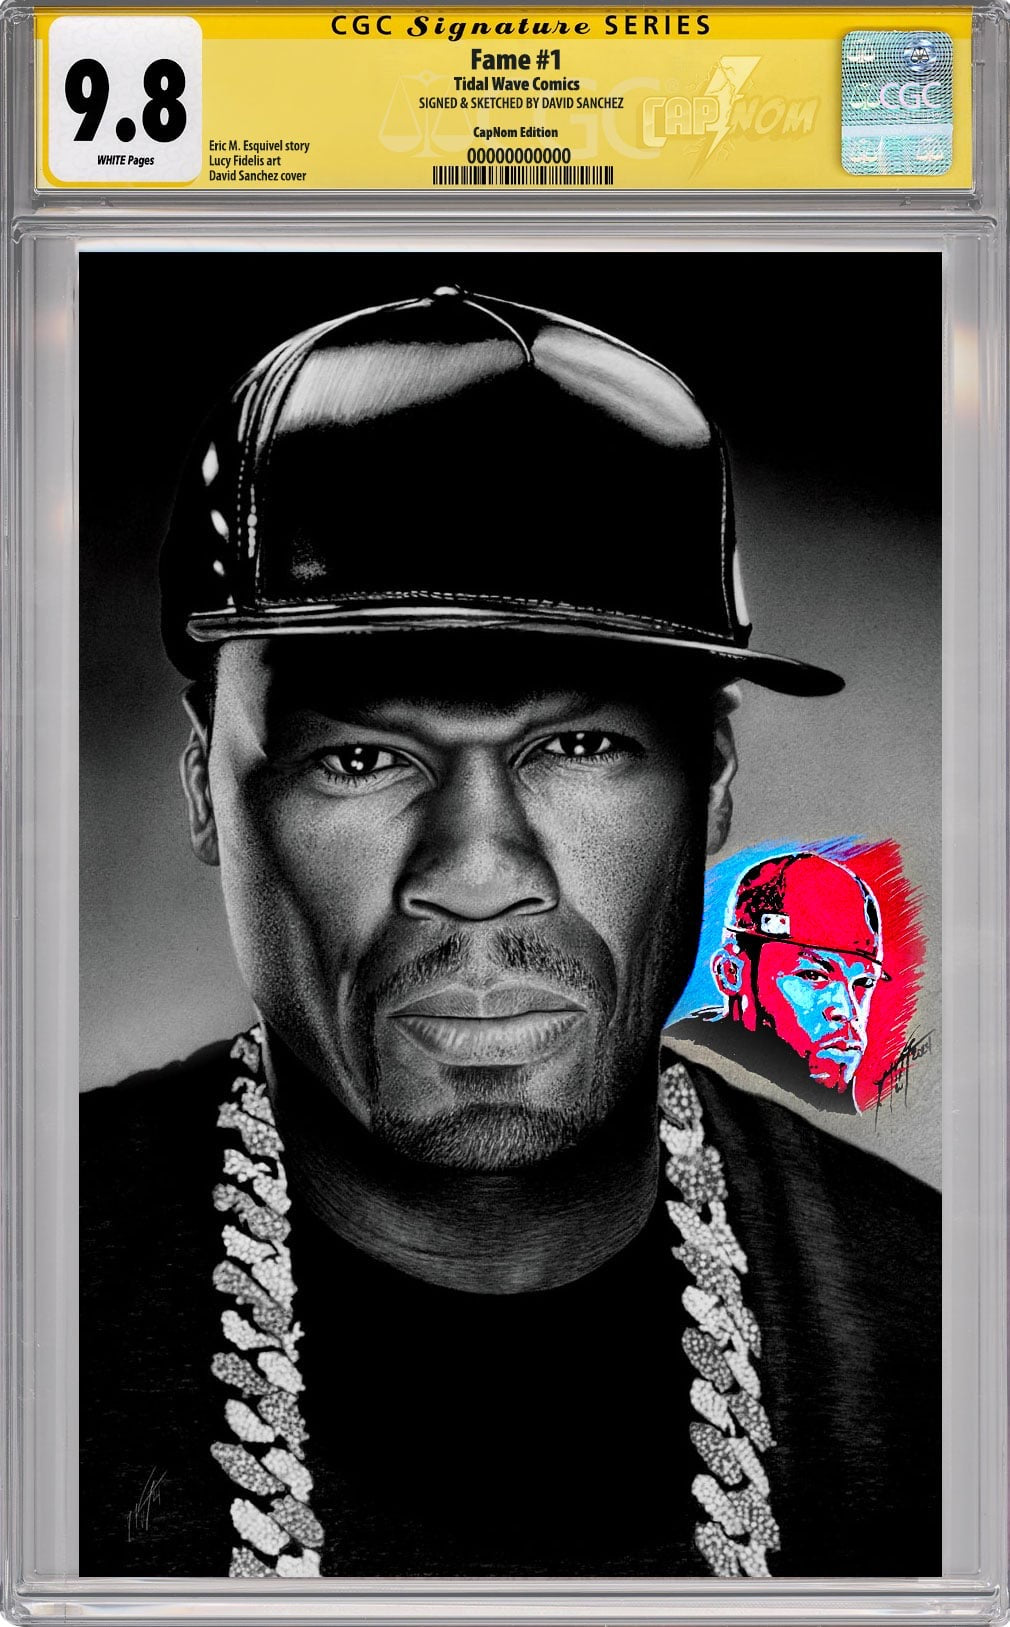 50 CENT FAME C2E2 Exclusive CGC SS 9.8 Virgin Cover Signed and Color Remark by David Sanchez